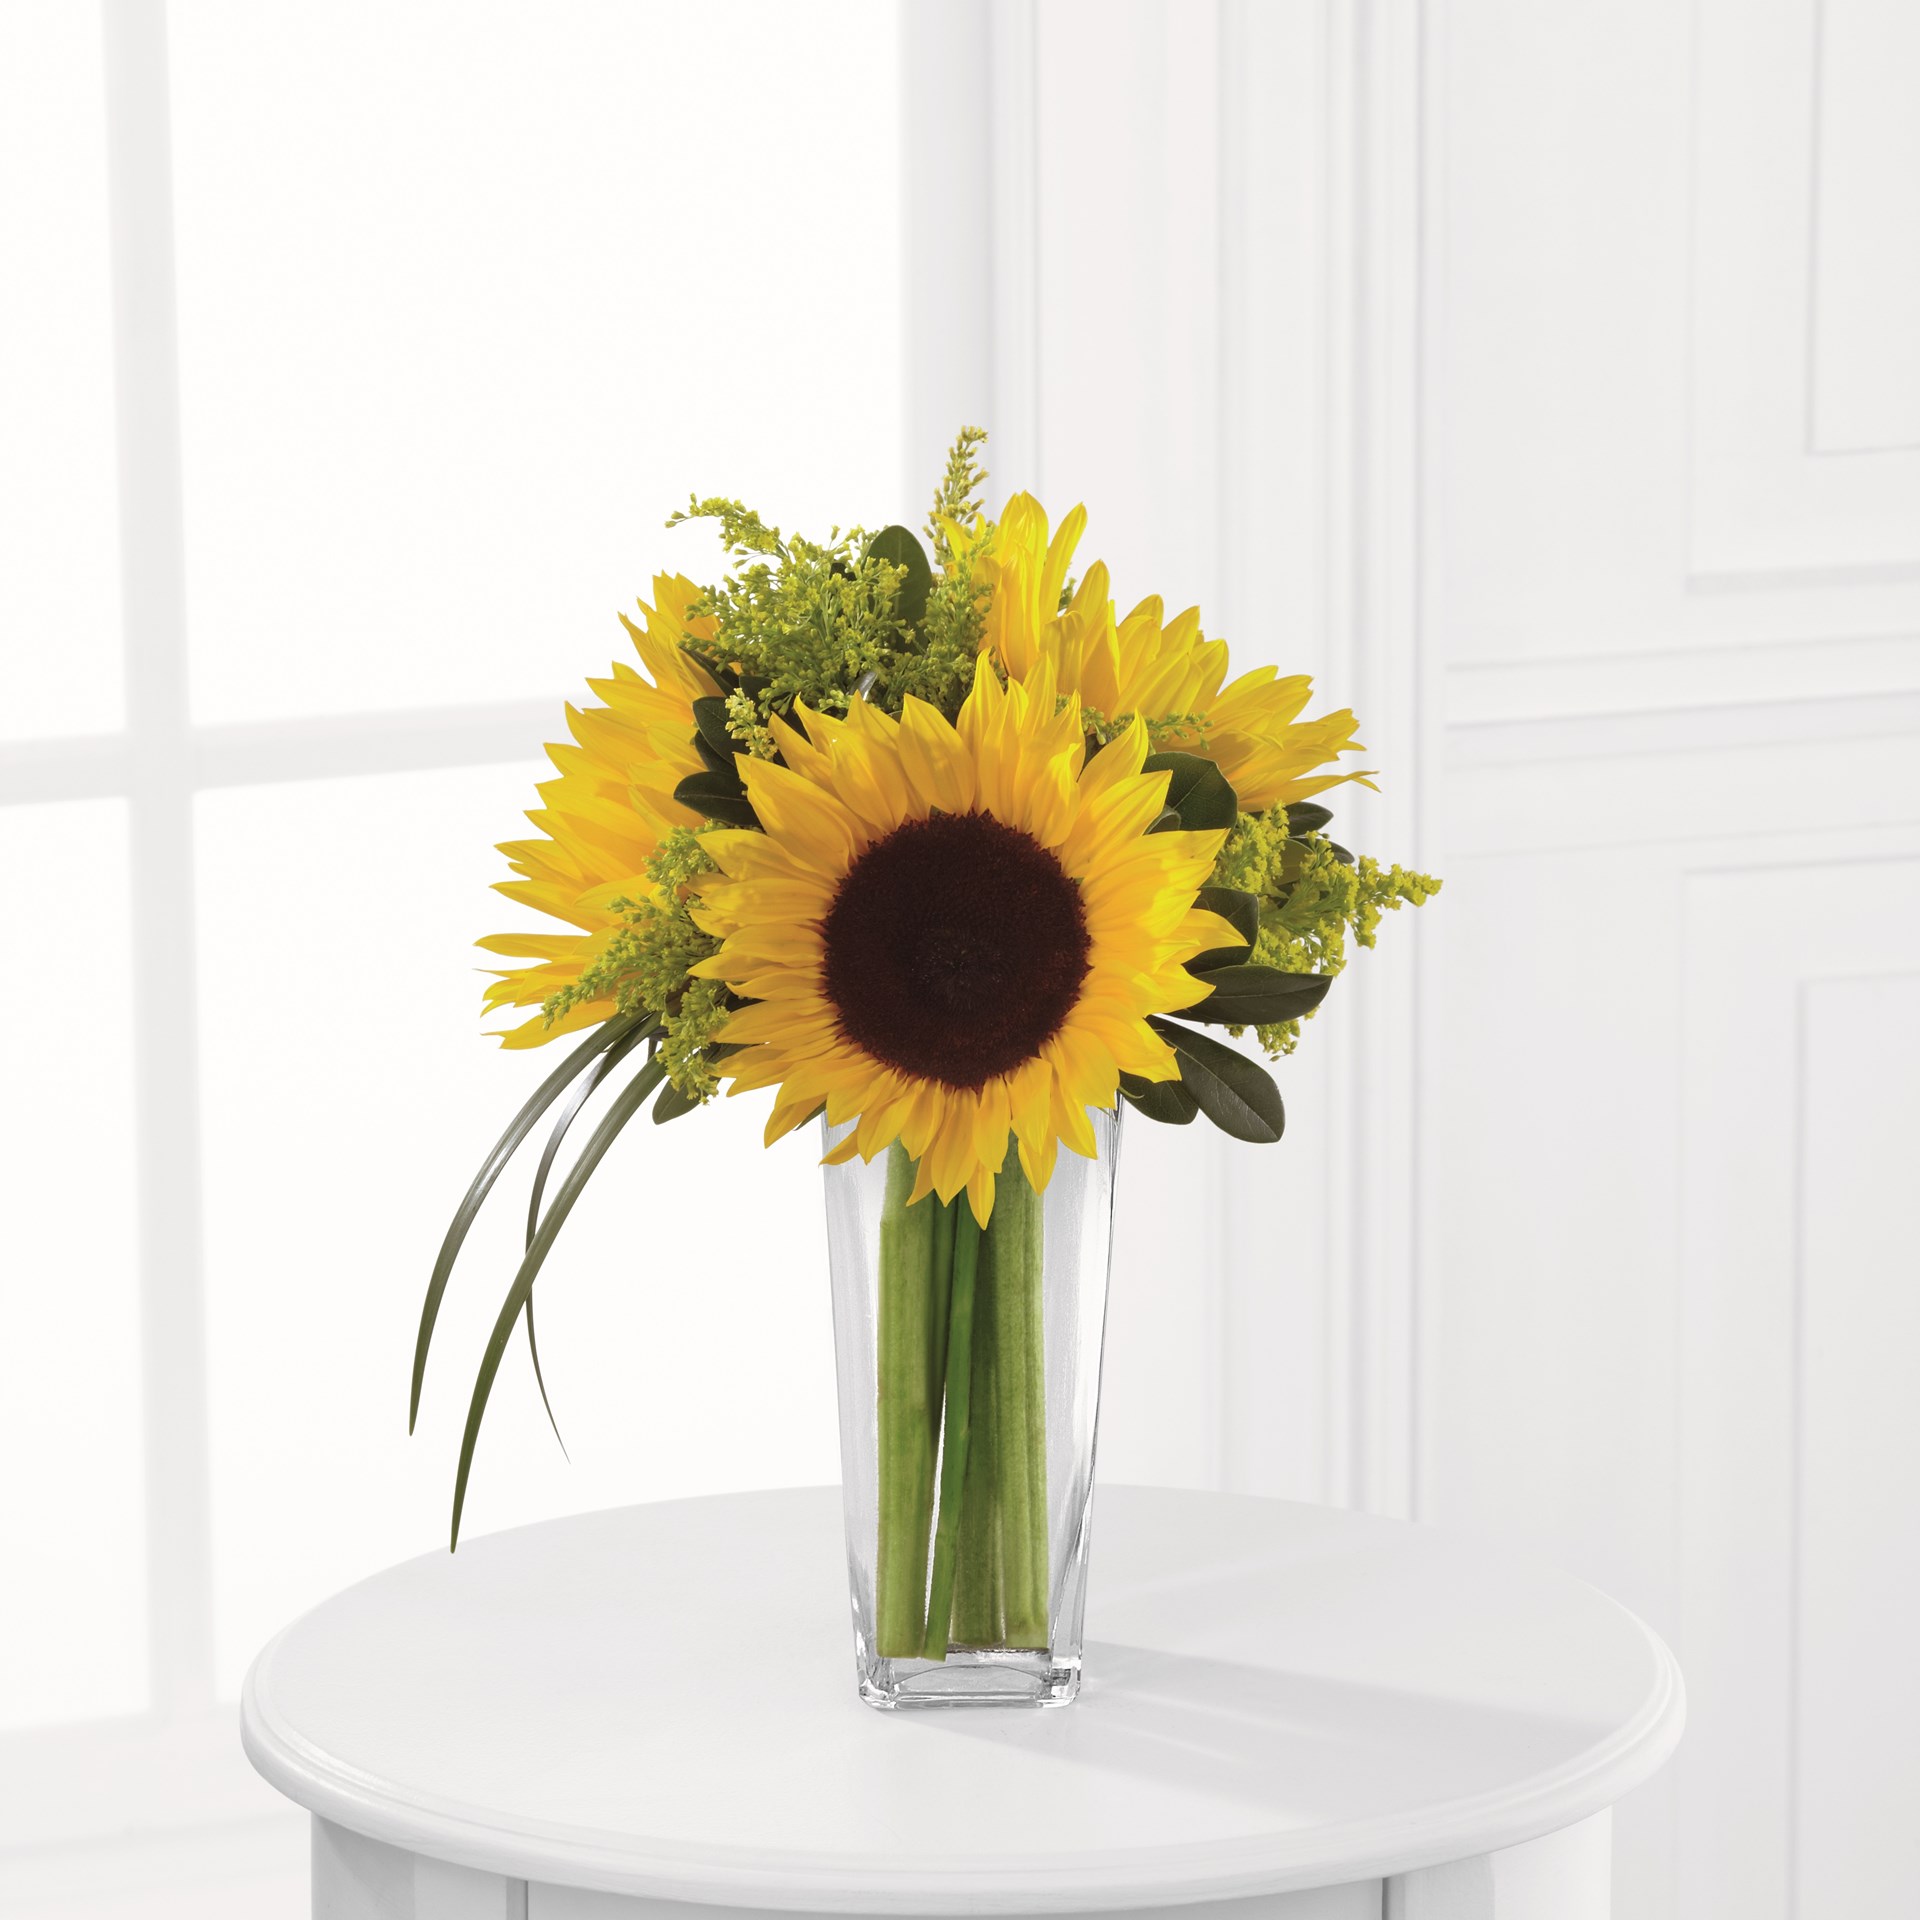 product image for The FTD Sunshine Daydream Bouquet